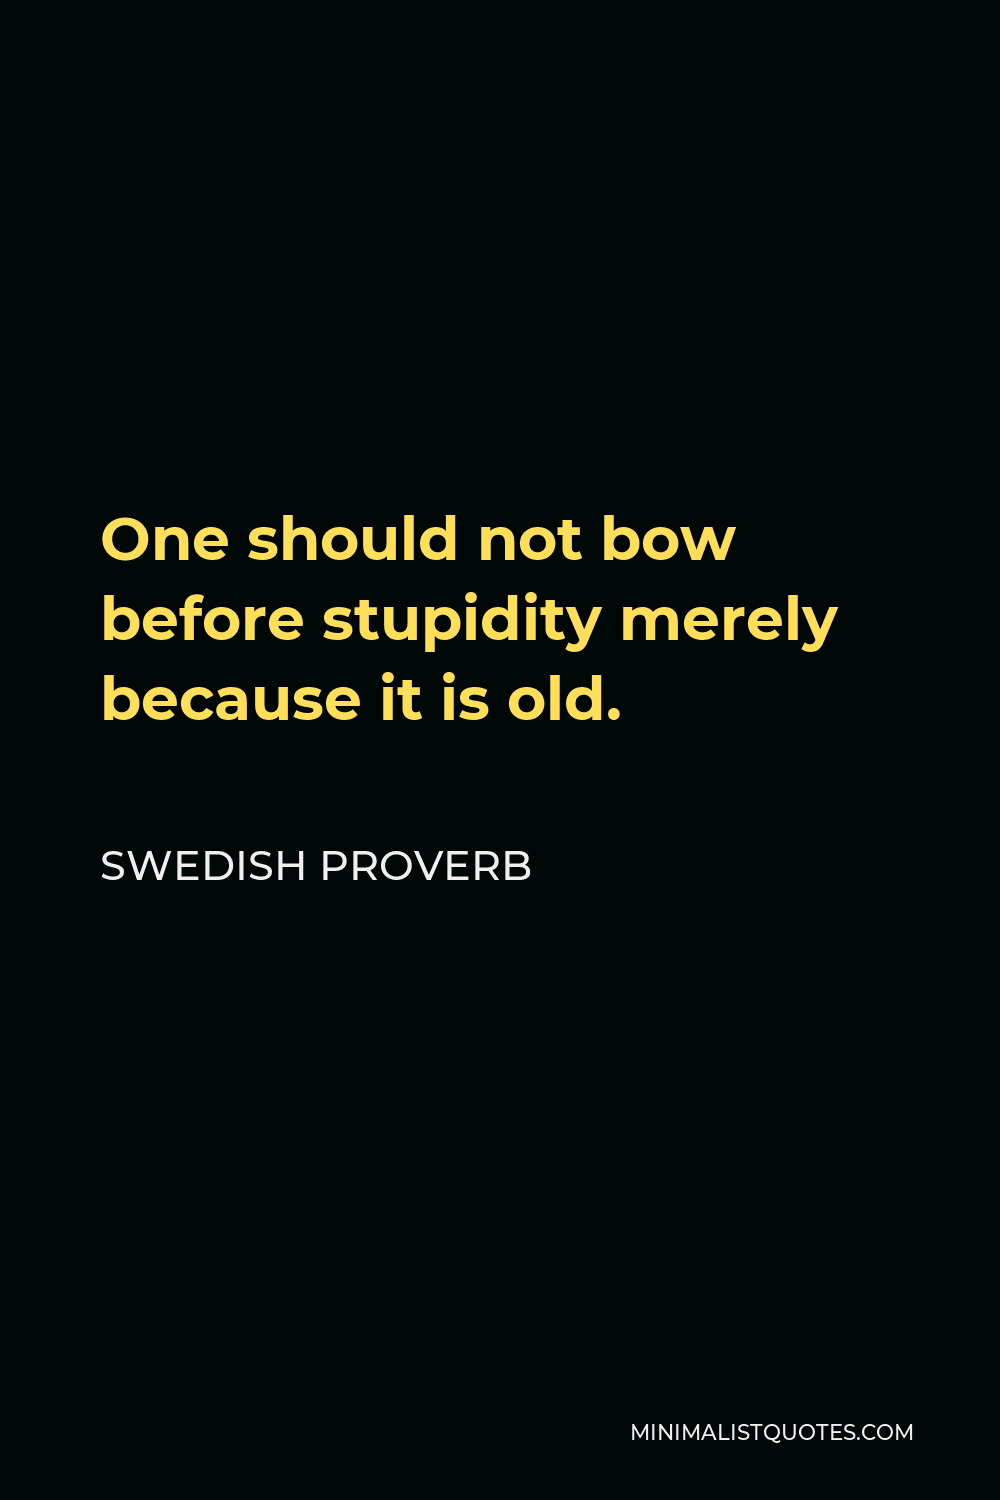 Swedish Proverb Quote - One should not bow before stupidity merely because it is old.